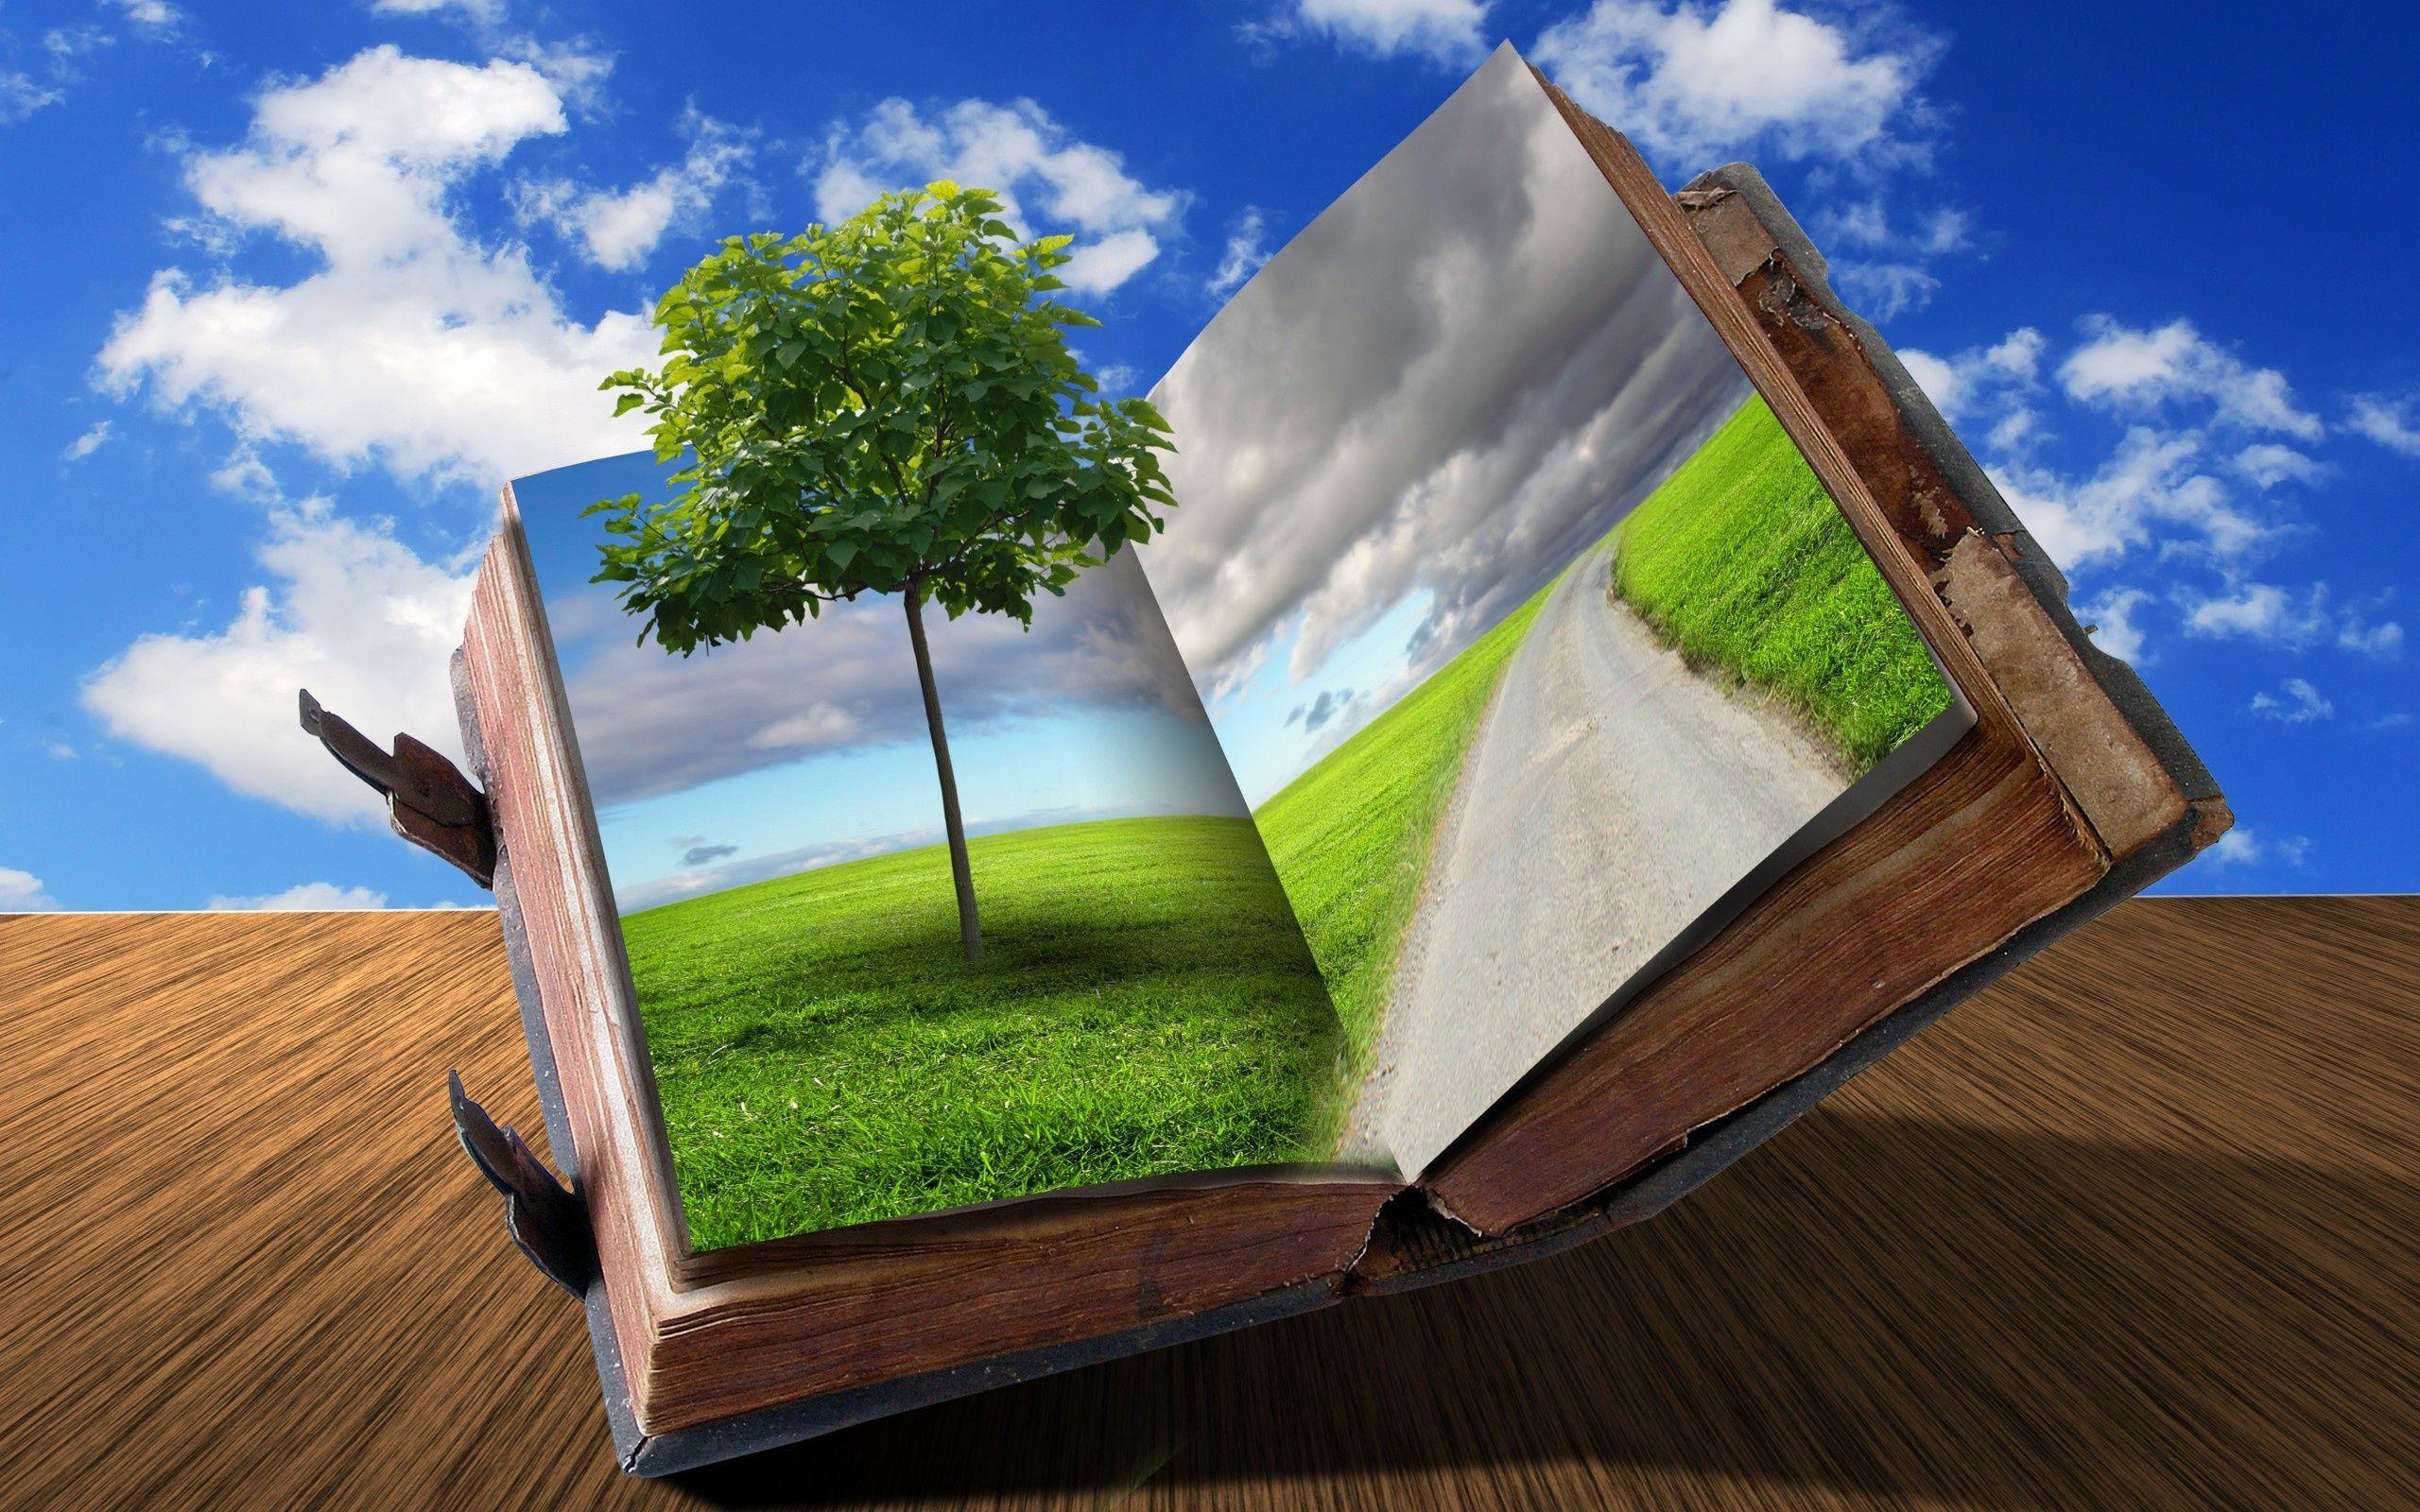 Books Photos Download The BEST Free Books Stock Photos  HD Images